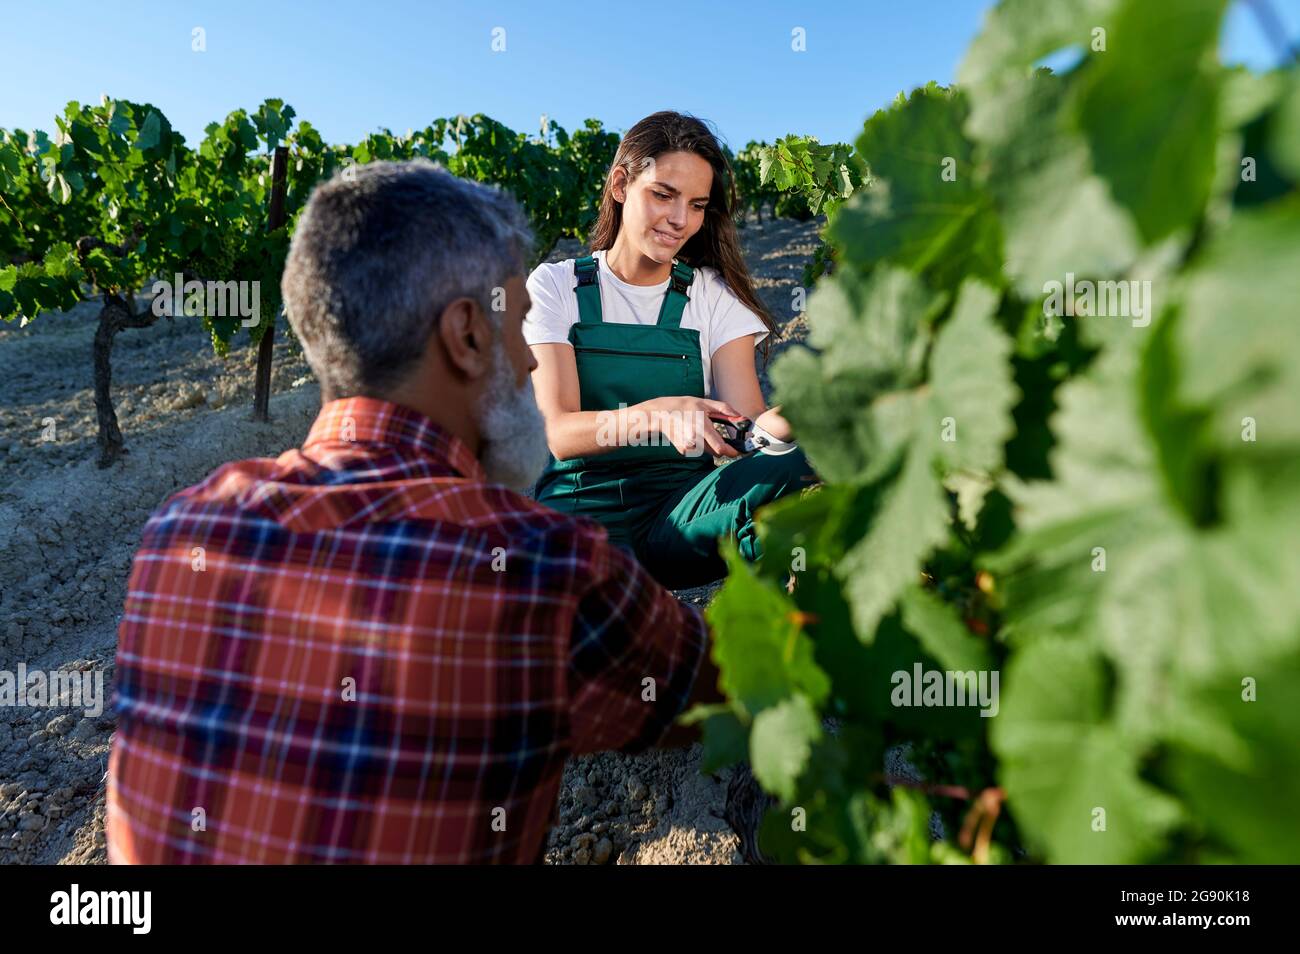 Female farmer pruning vine plant in front of man at vineyard Stock Photo